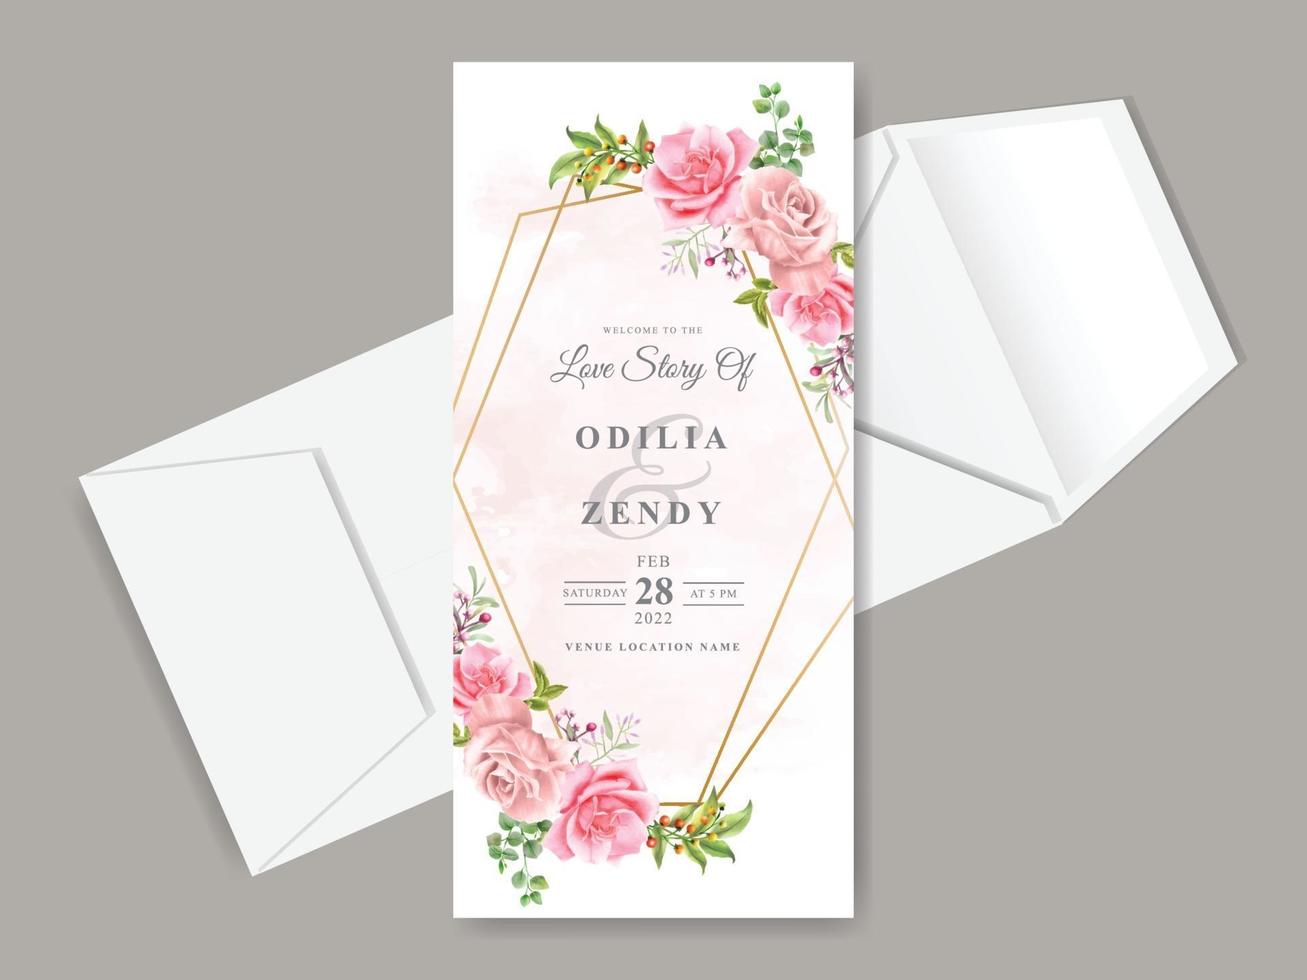 Beautiful wedding invitation card template with floral hand drawn vector